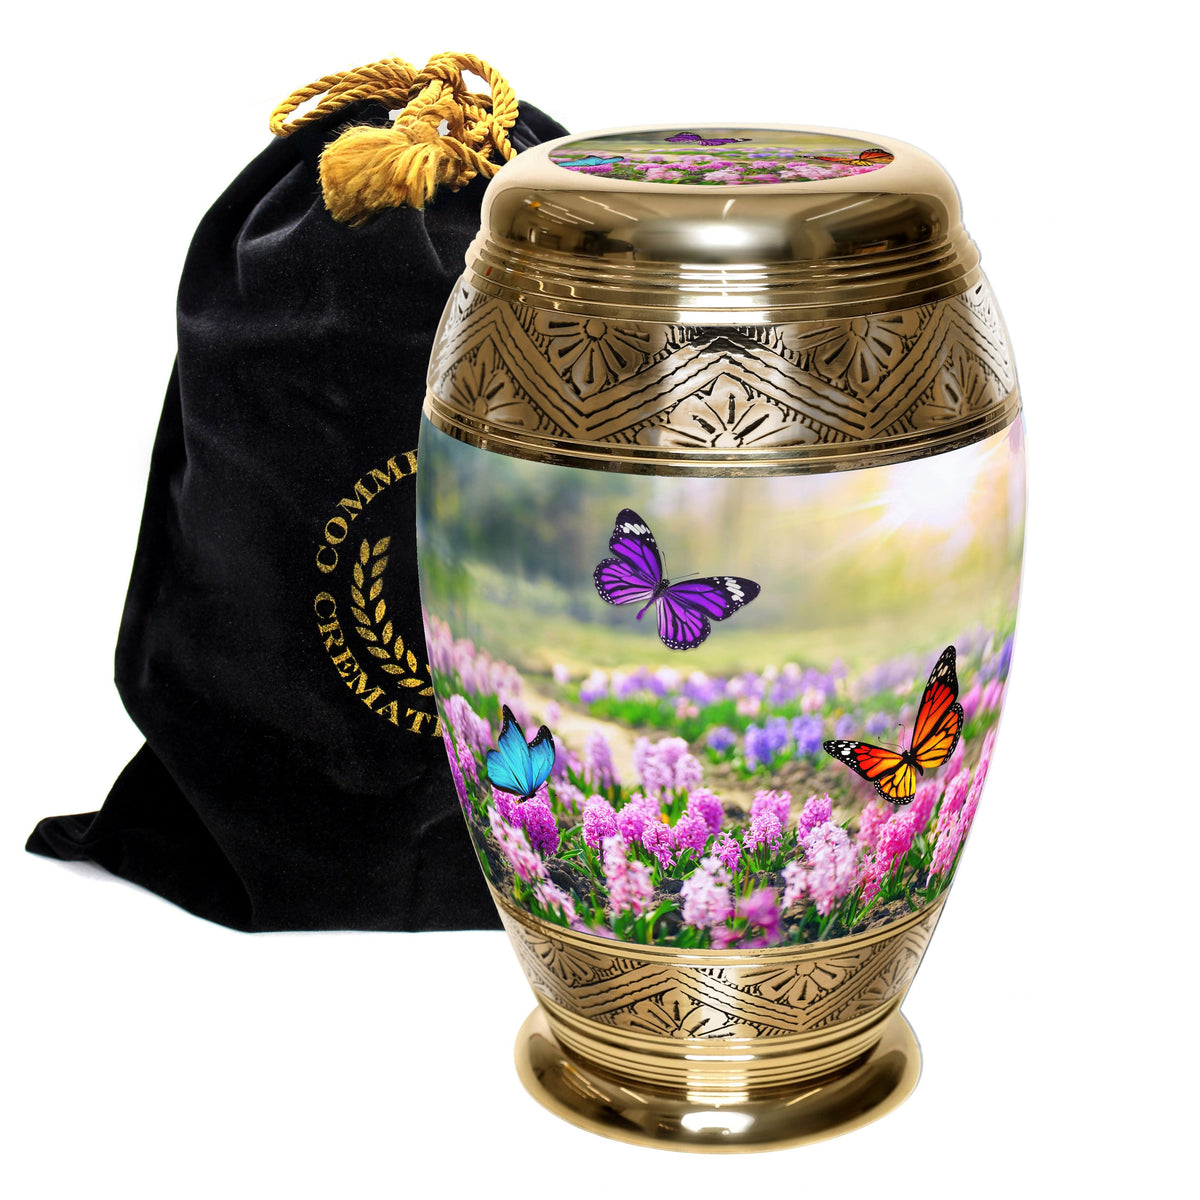 Commemorative Cremation Urns Home &amp; Garden Large Blissful Butterflies Cremation Urns